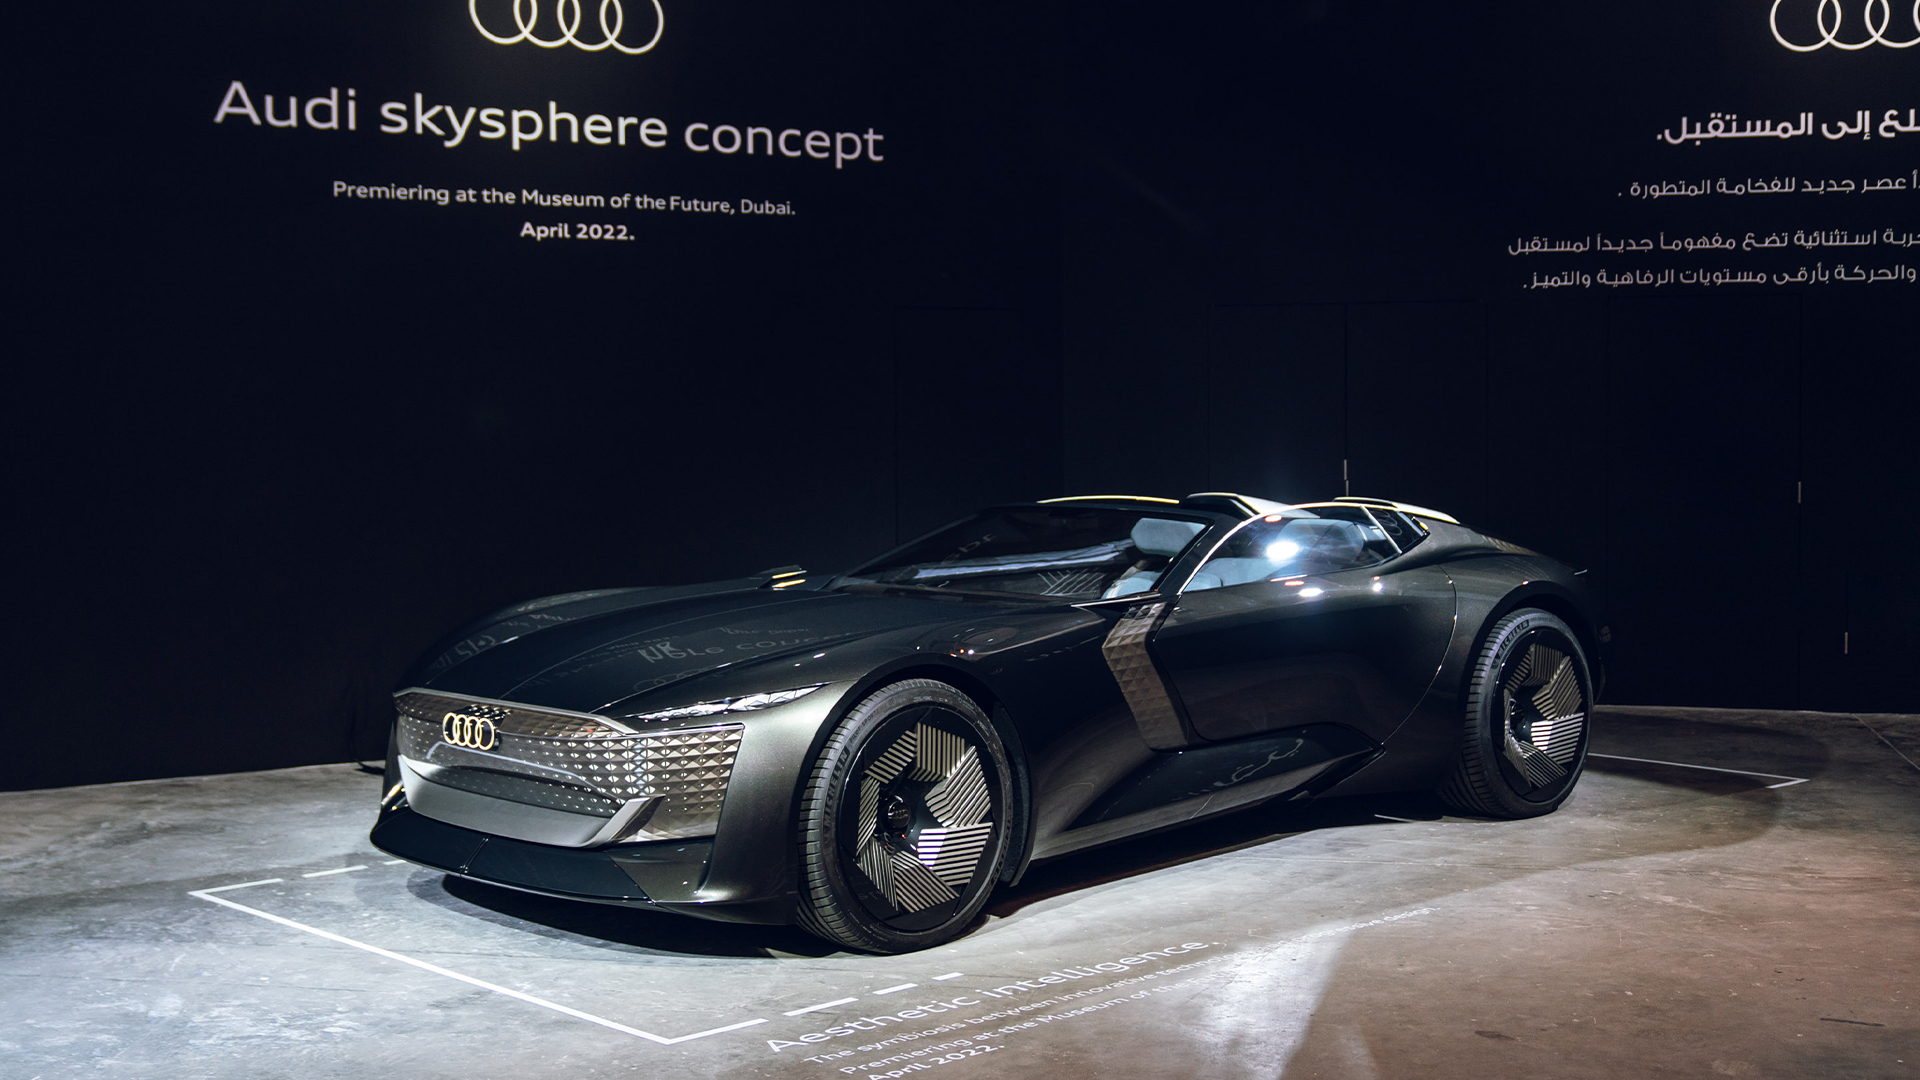 The Audi skysphere concept is on show at the museum.